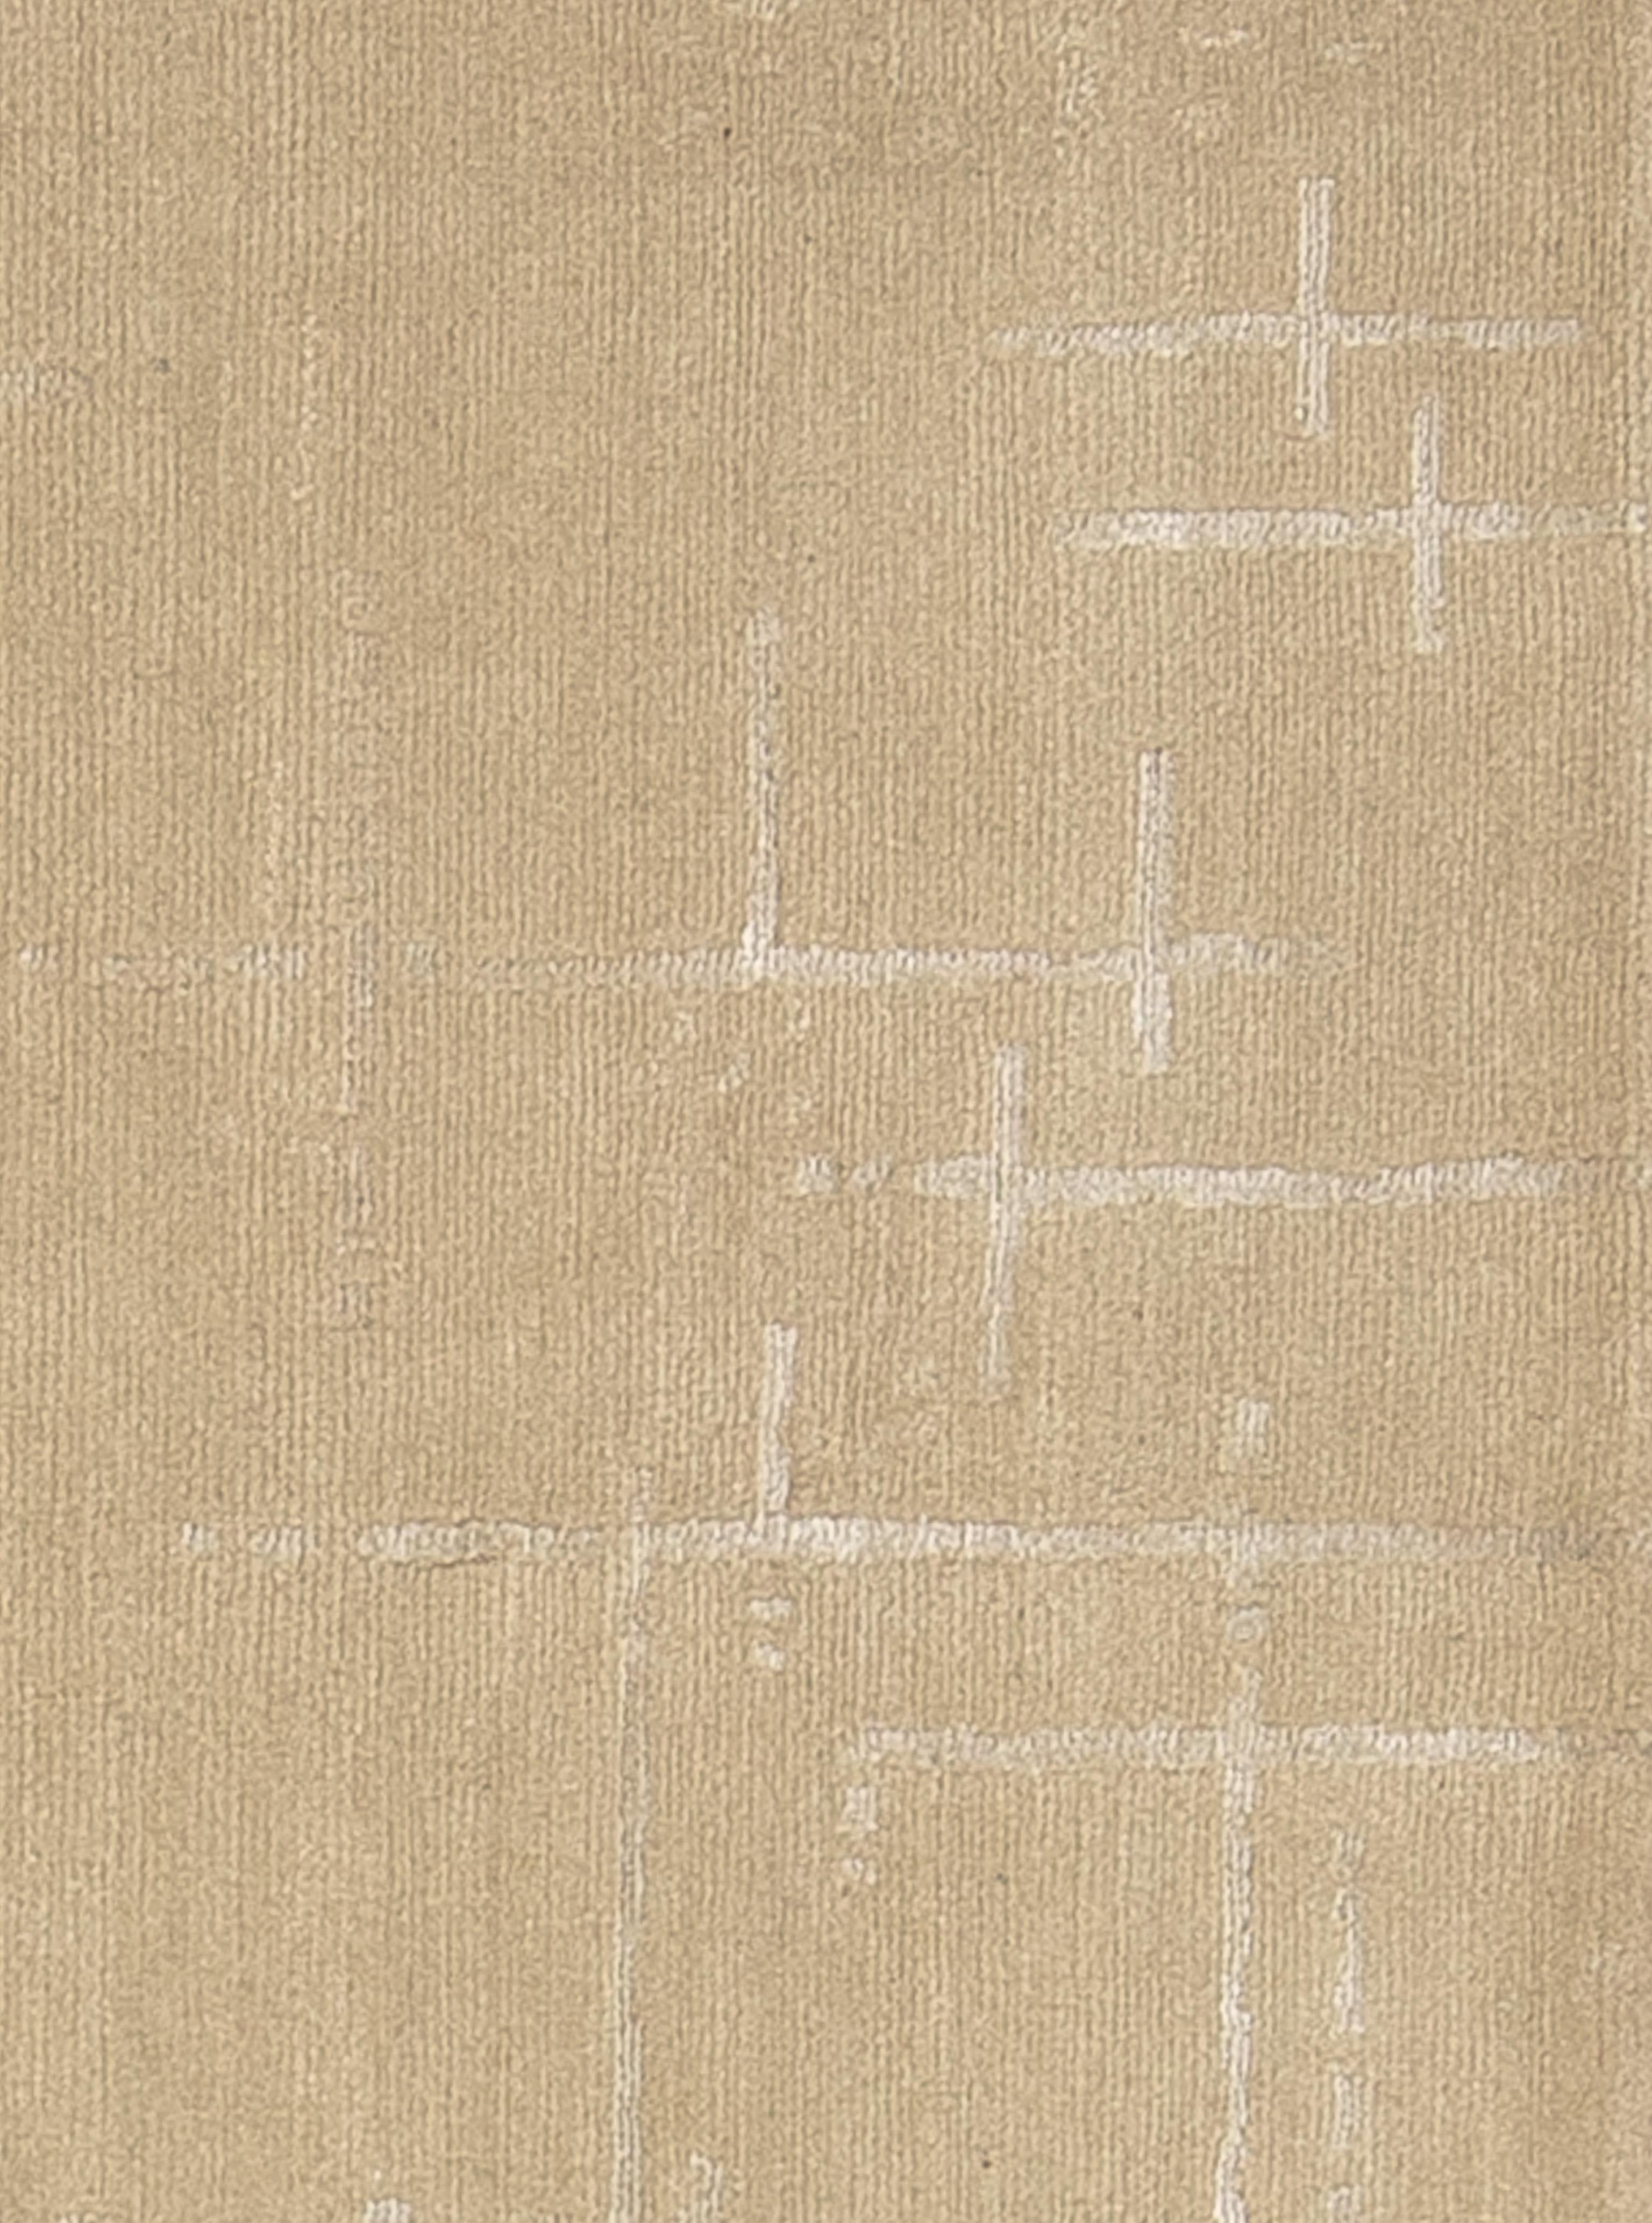 Modern contemporary rug woven with pure New Zealand wool and silk. The clean lines and neutral color palette make this rug the perfect complement to a minimalist, modern décor. 

Size - 6' x 9'1